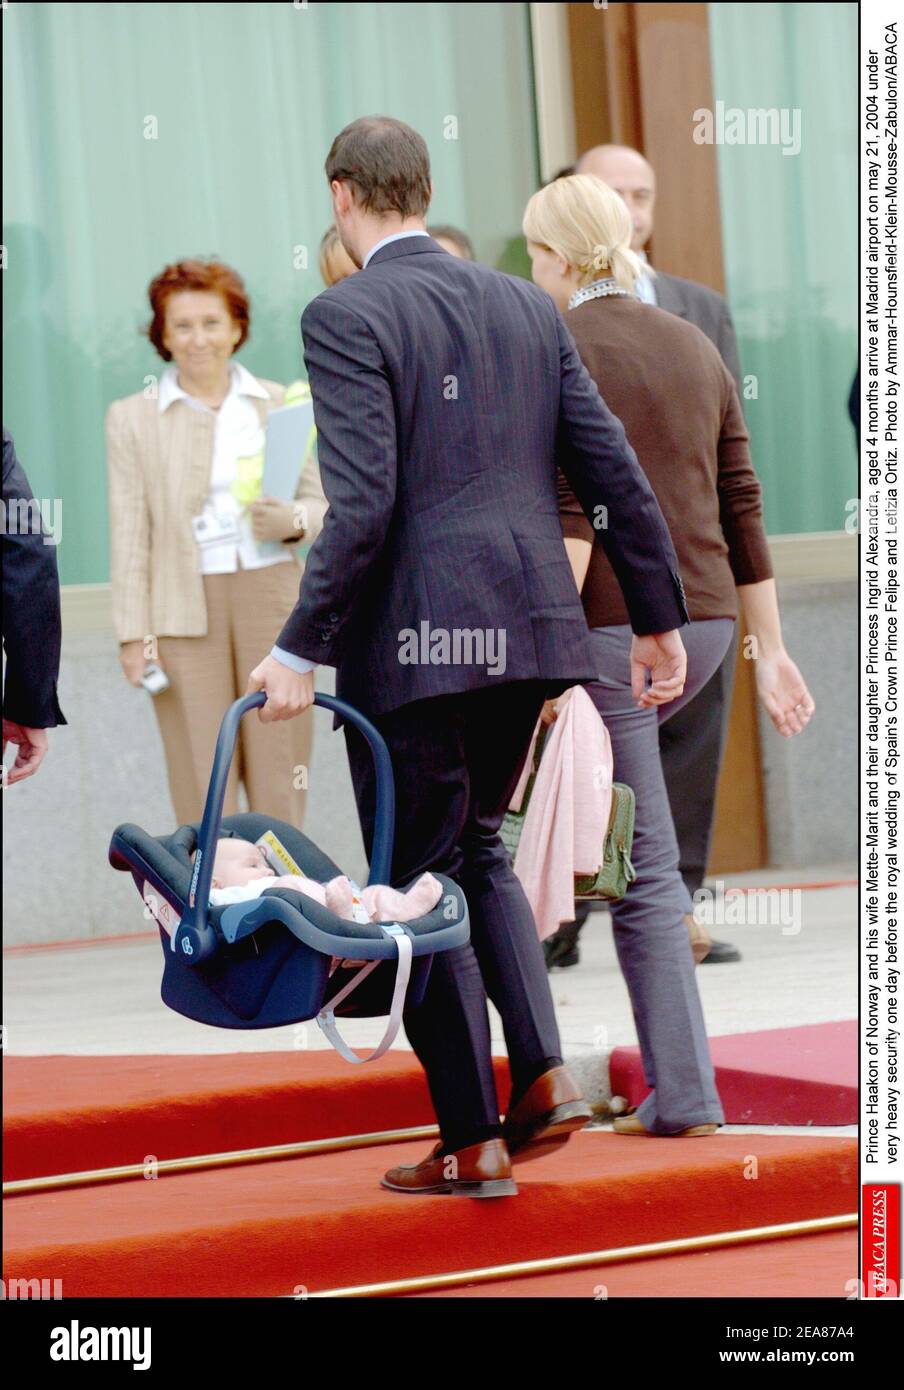 Prince Haakon of Norway and his wife Mette-Marit and their daughter Princess Ingrid Alexandra, aged 4 months arrive at Madrid airport on may 21, 2004 under very heavy security one day before the royal wedding of Spain's Crown Prince Felipe and Letizia Ortiz. Photo by Ammar-Hounsfield-Klein-Mousse-Zabulon/ABACA Stock Photo